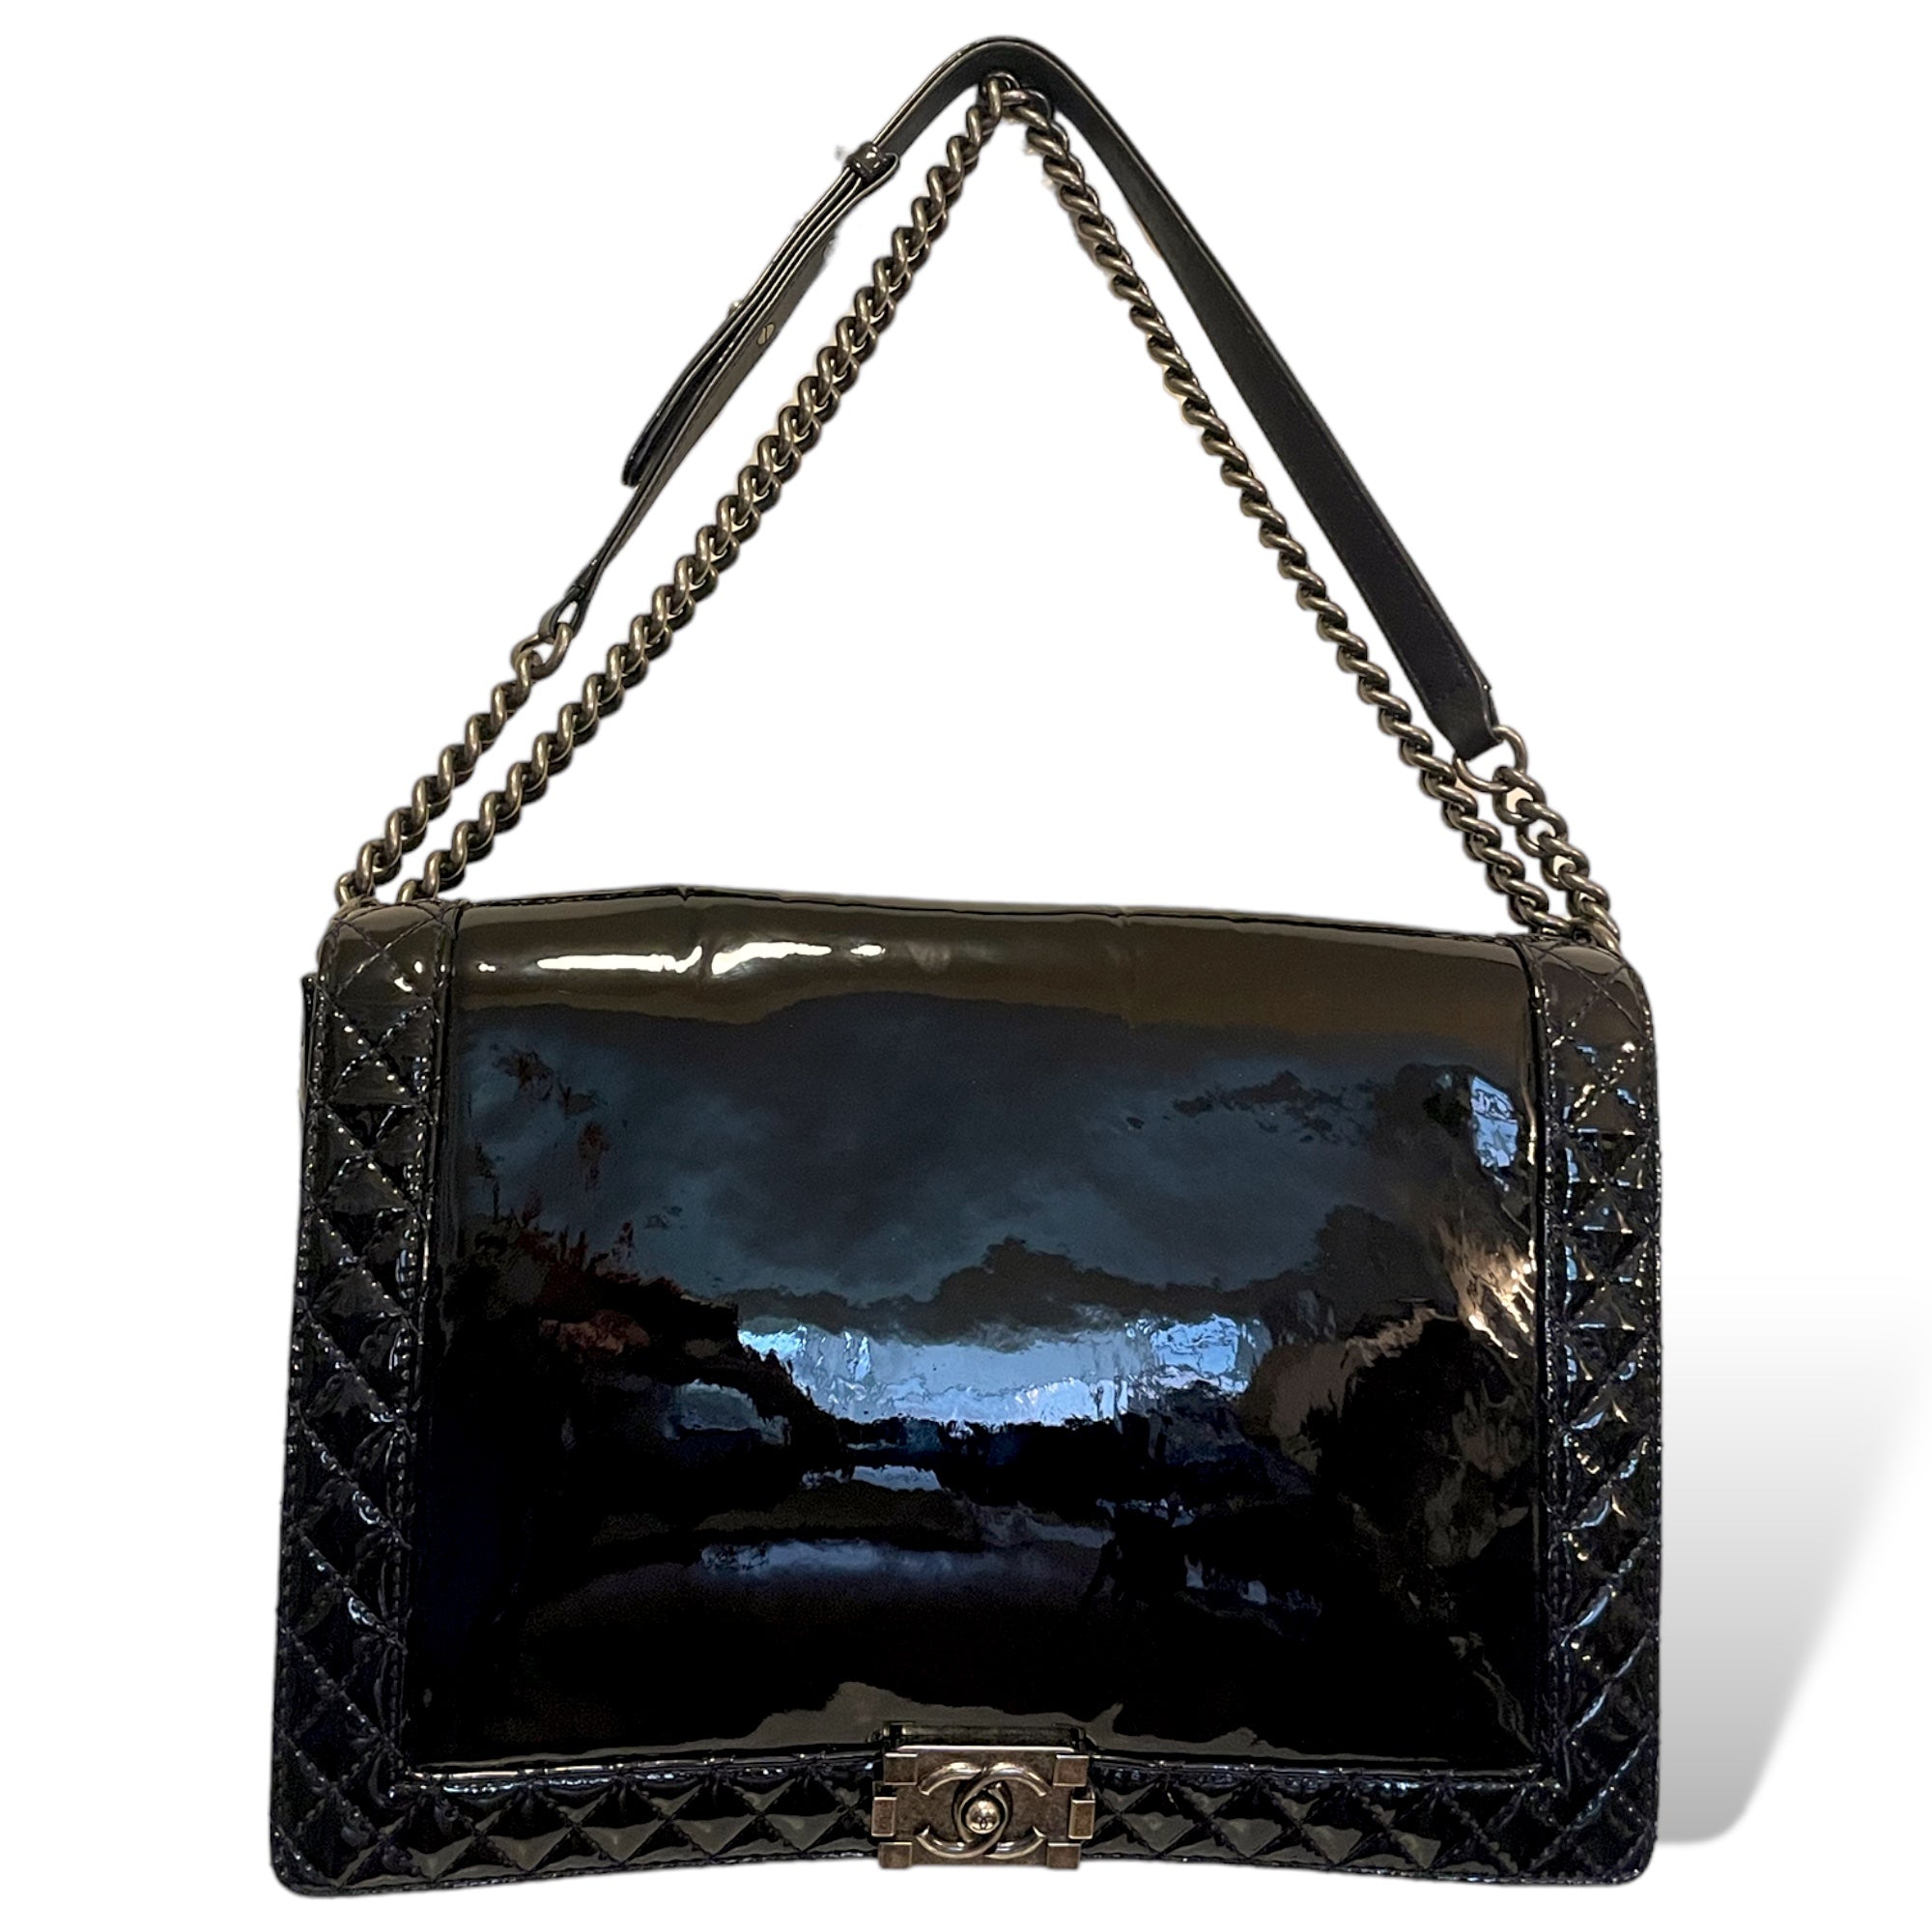 CHANEL Reverso Boy Flap Bag Patent Large in Midnight Blue